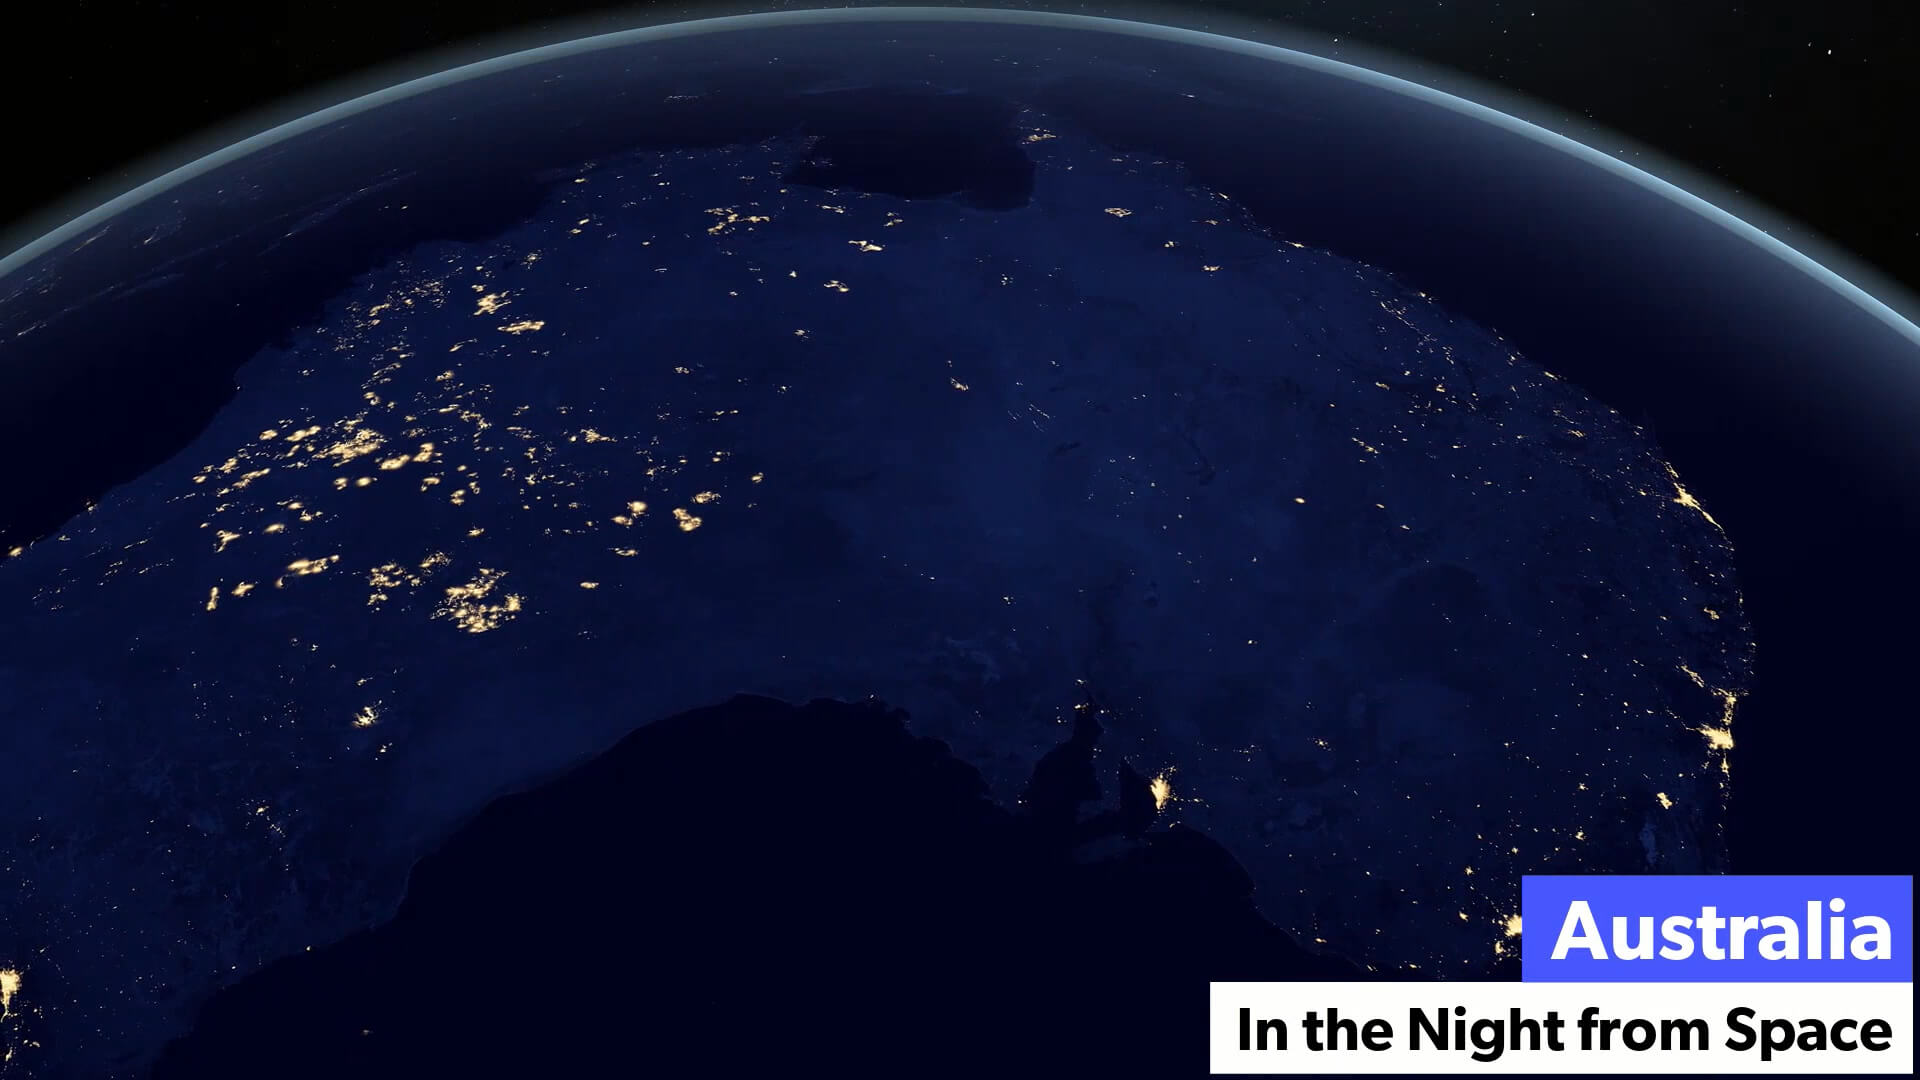 Australia in the Night from Space